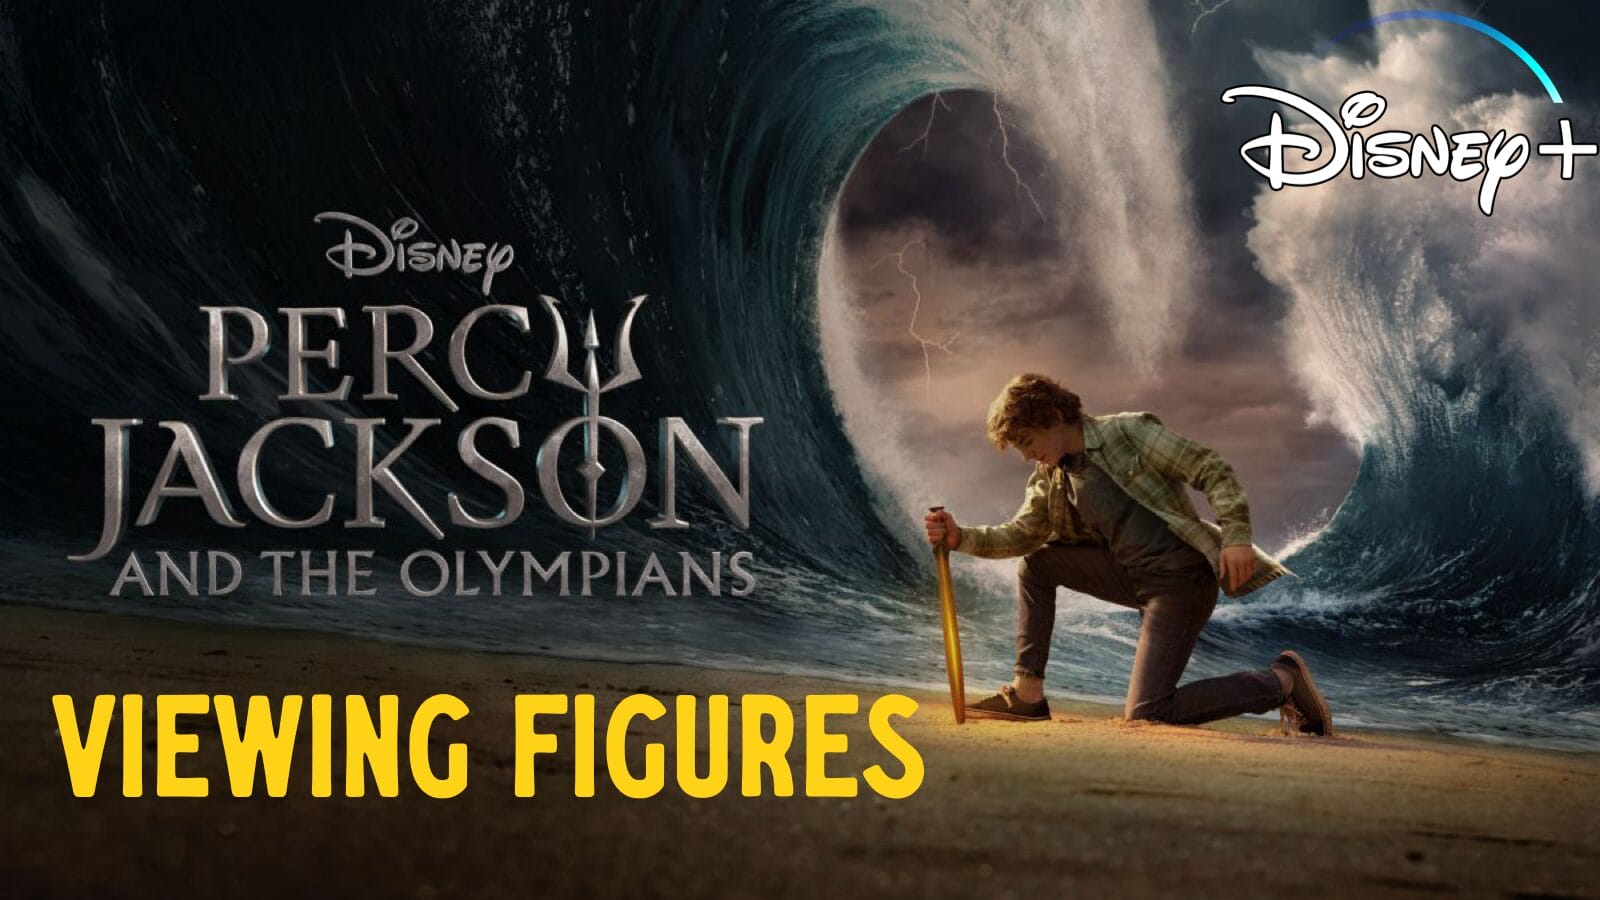 Percy Jackson Viewing Figures